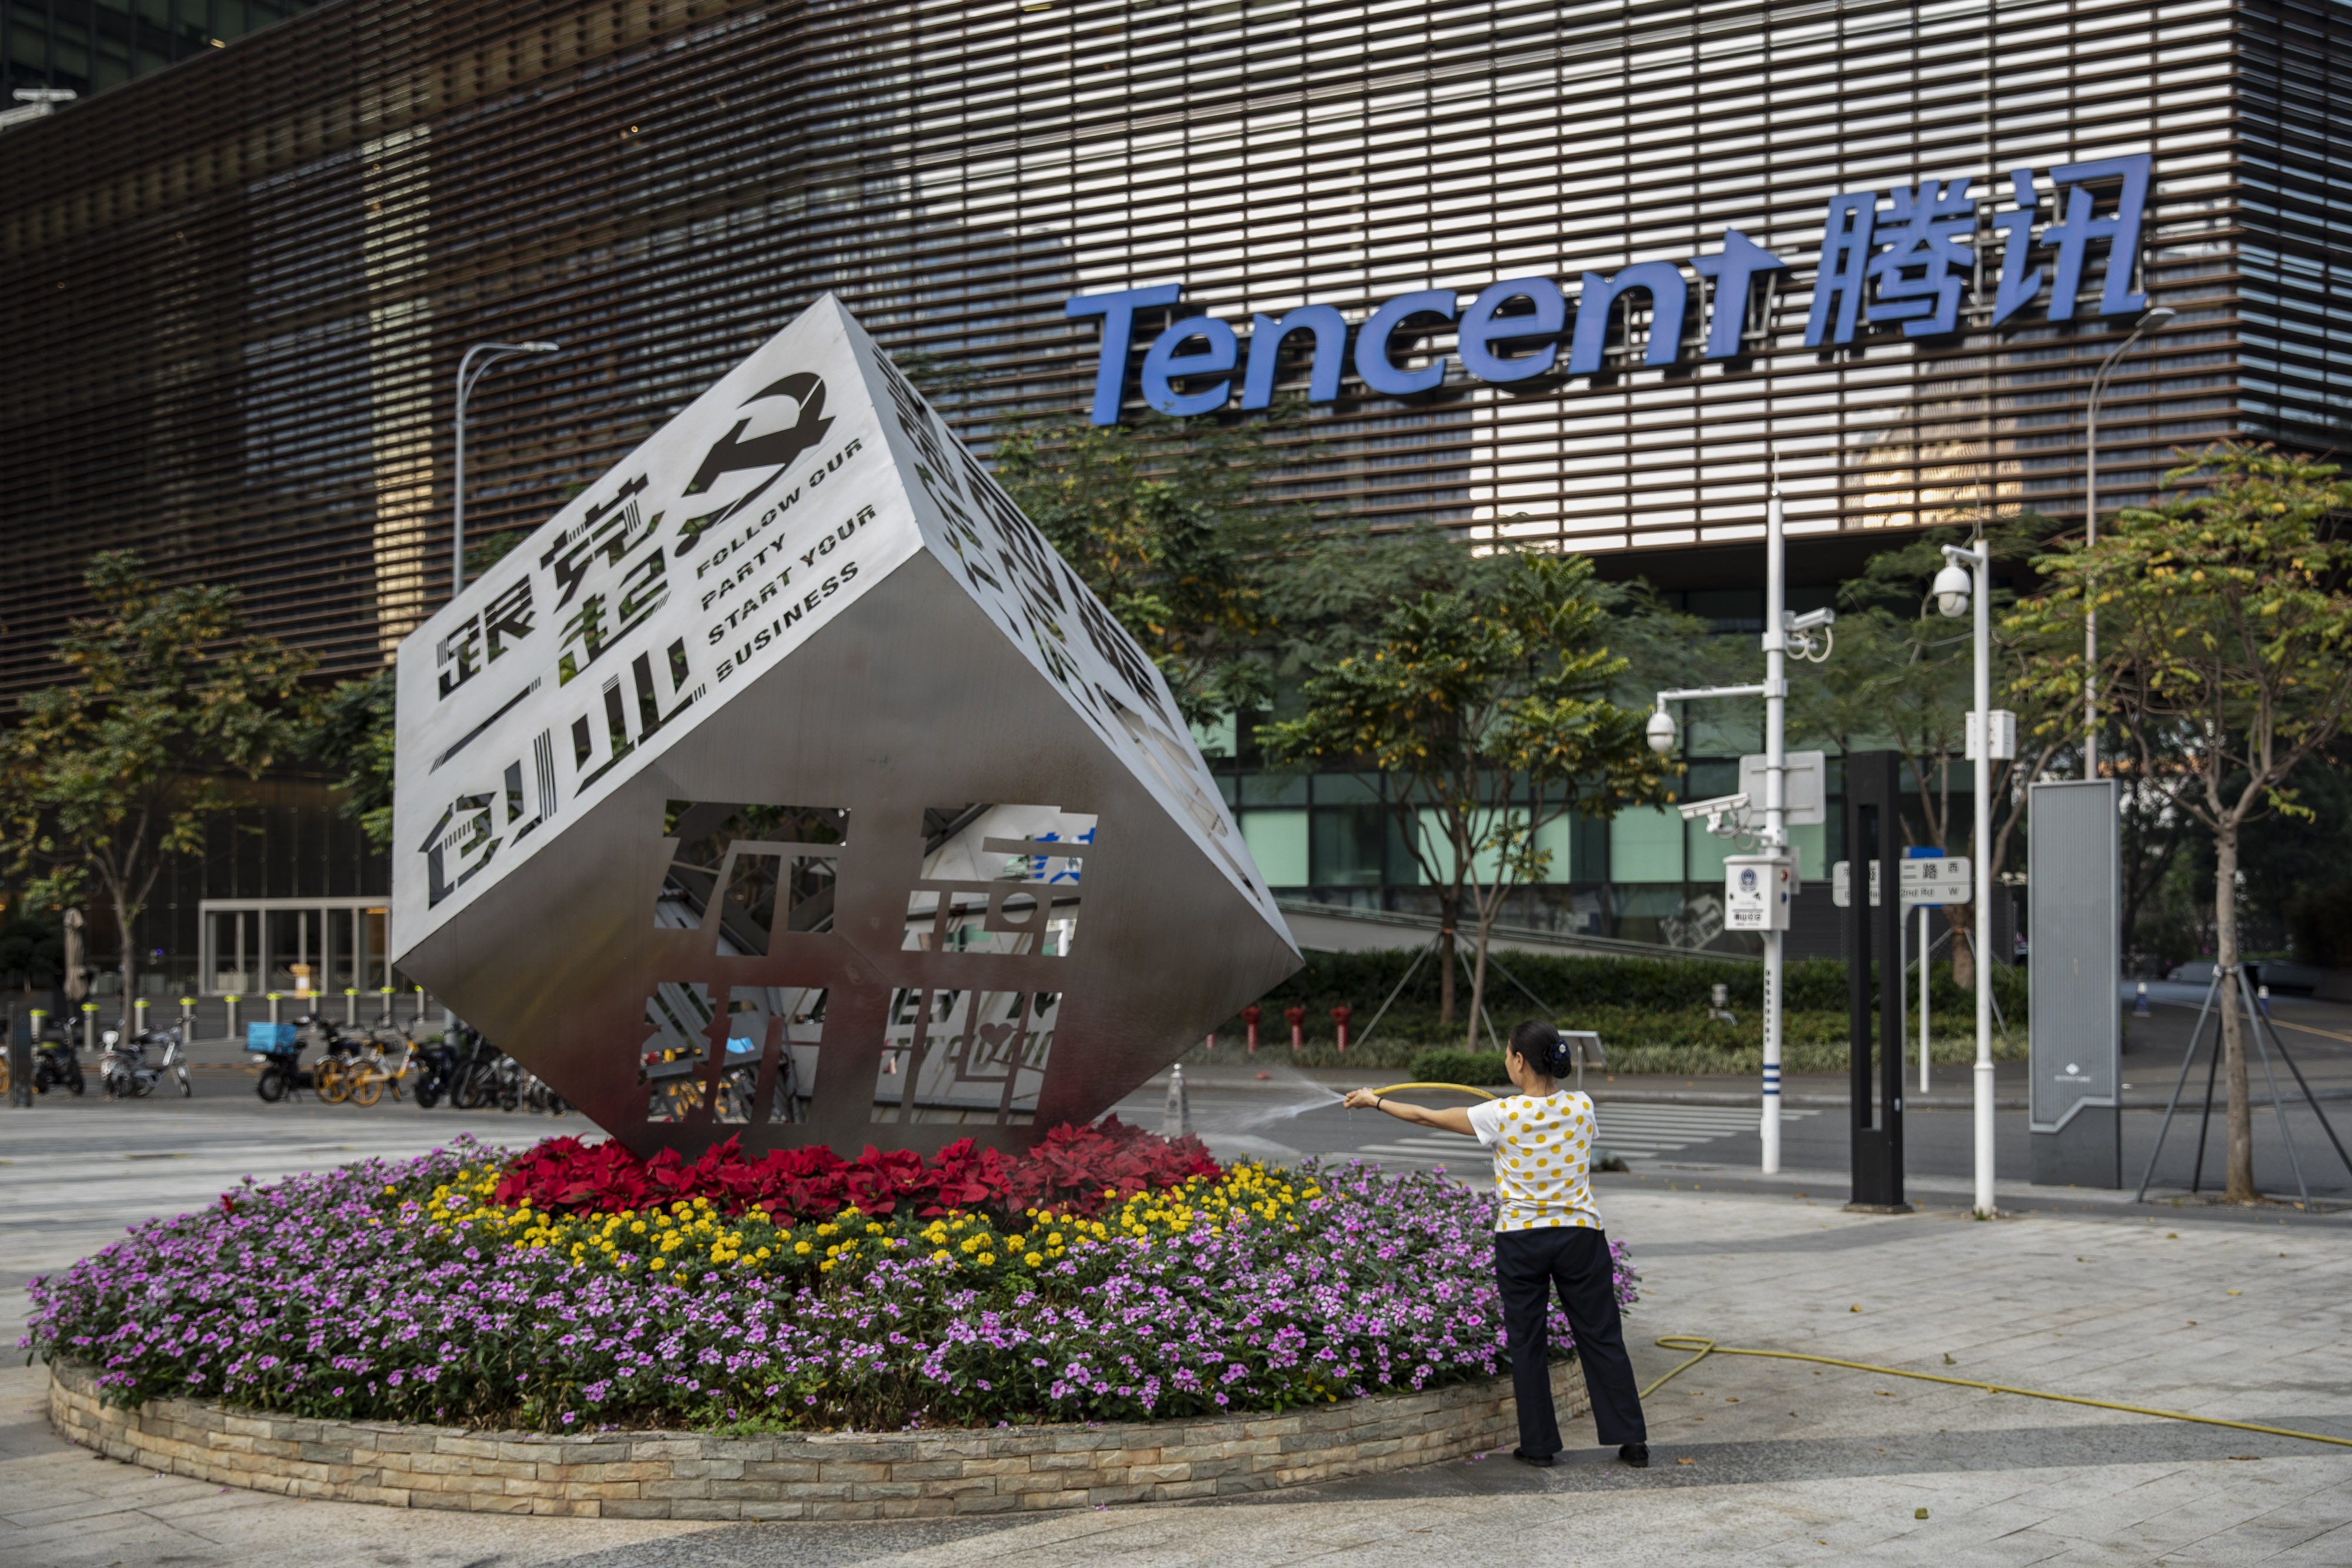 Internet giant Tencent Holdings was fined by China’s antitrust regulator for not reporting three mergers and acquisitions deals. Photo: Bloomberg